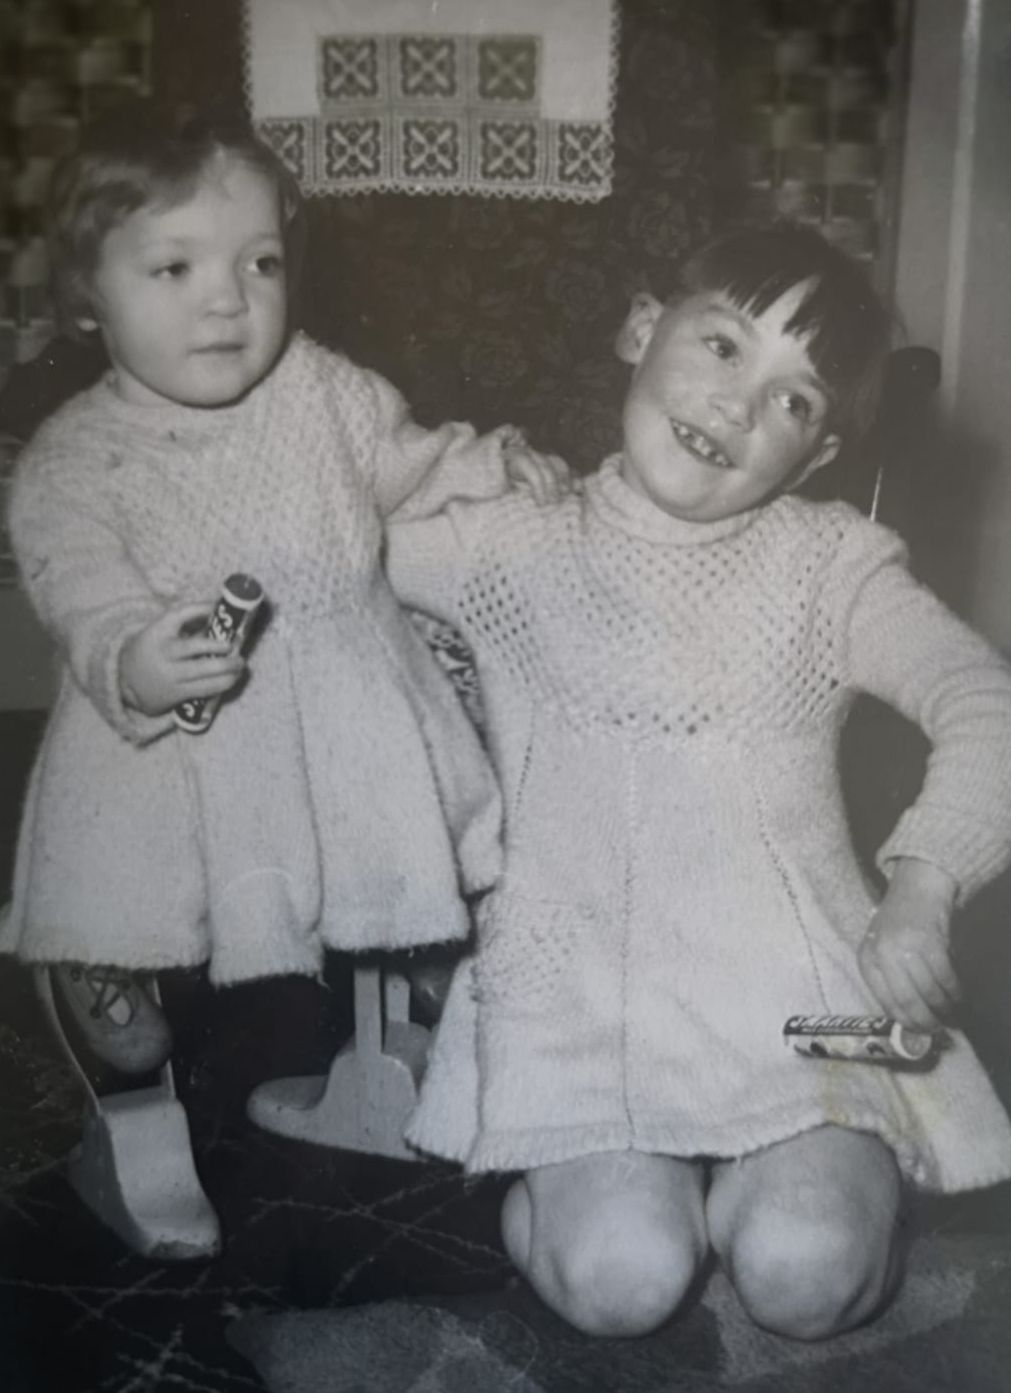 Teresa Smith from Southport is celebrating her 60th birthday. She is pictured with her sister Annette.